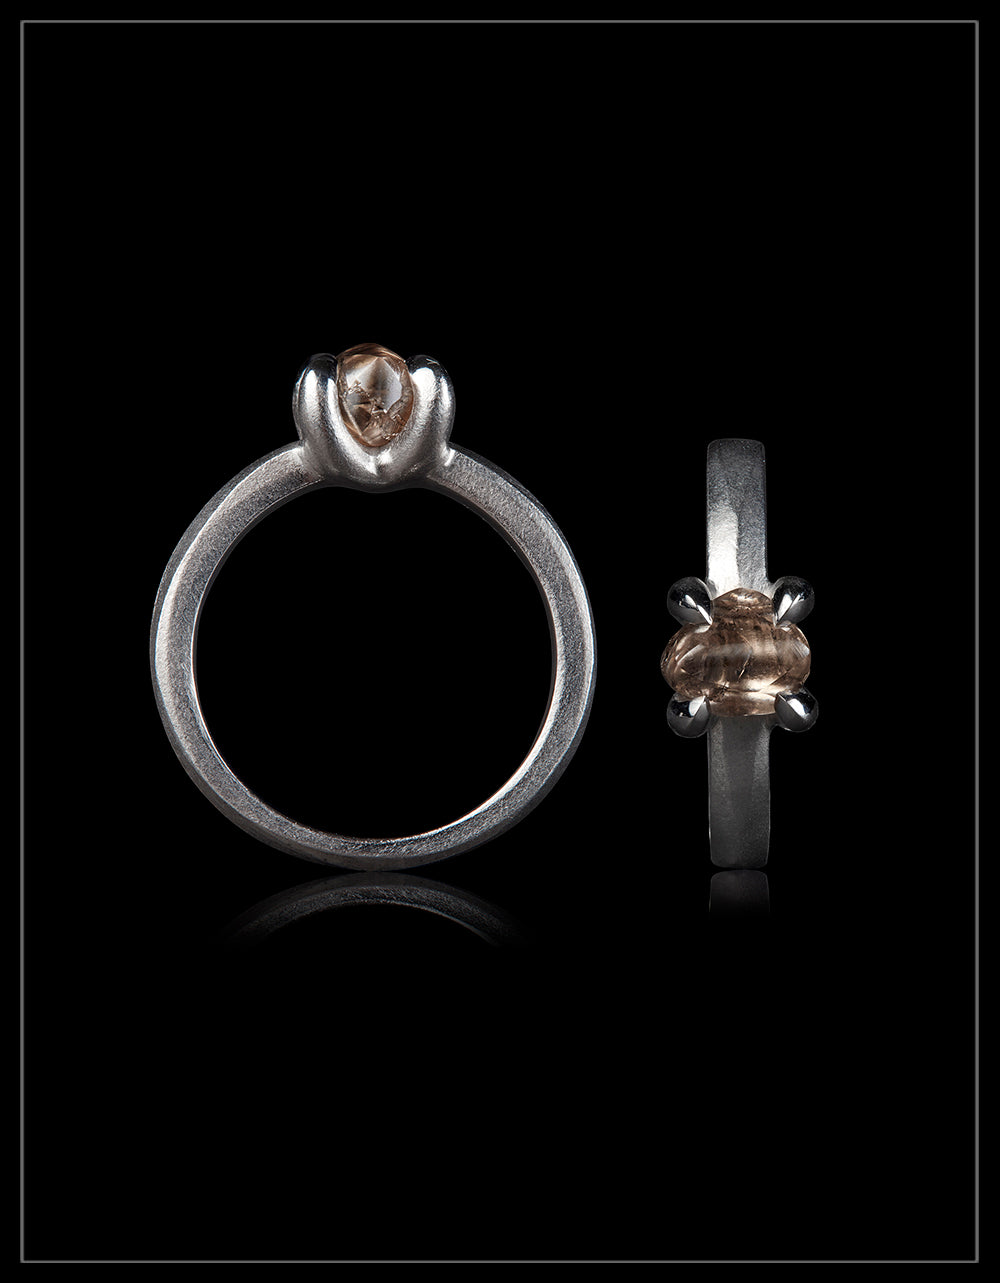 Diamond in its Rough White Gold Ring – 1.84 ct.